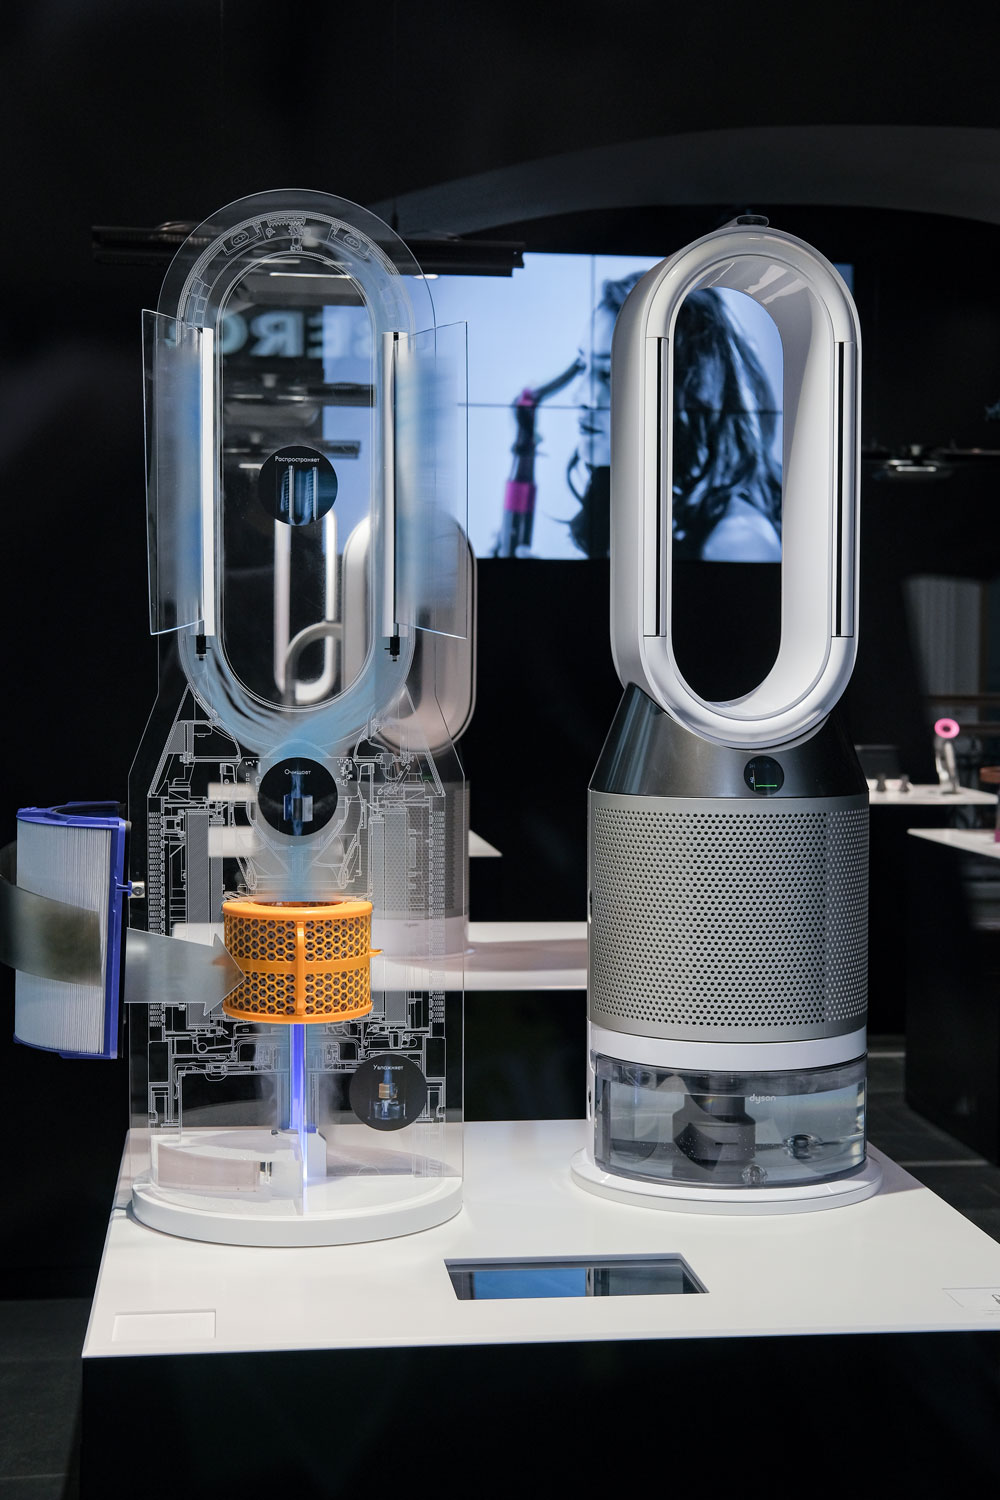 A transparent and high tech Dyson humidifier at a appliance showroom